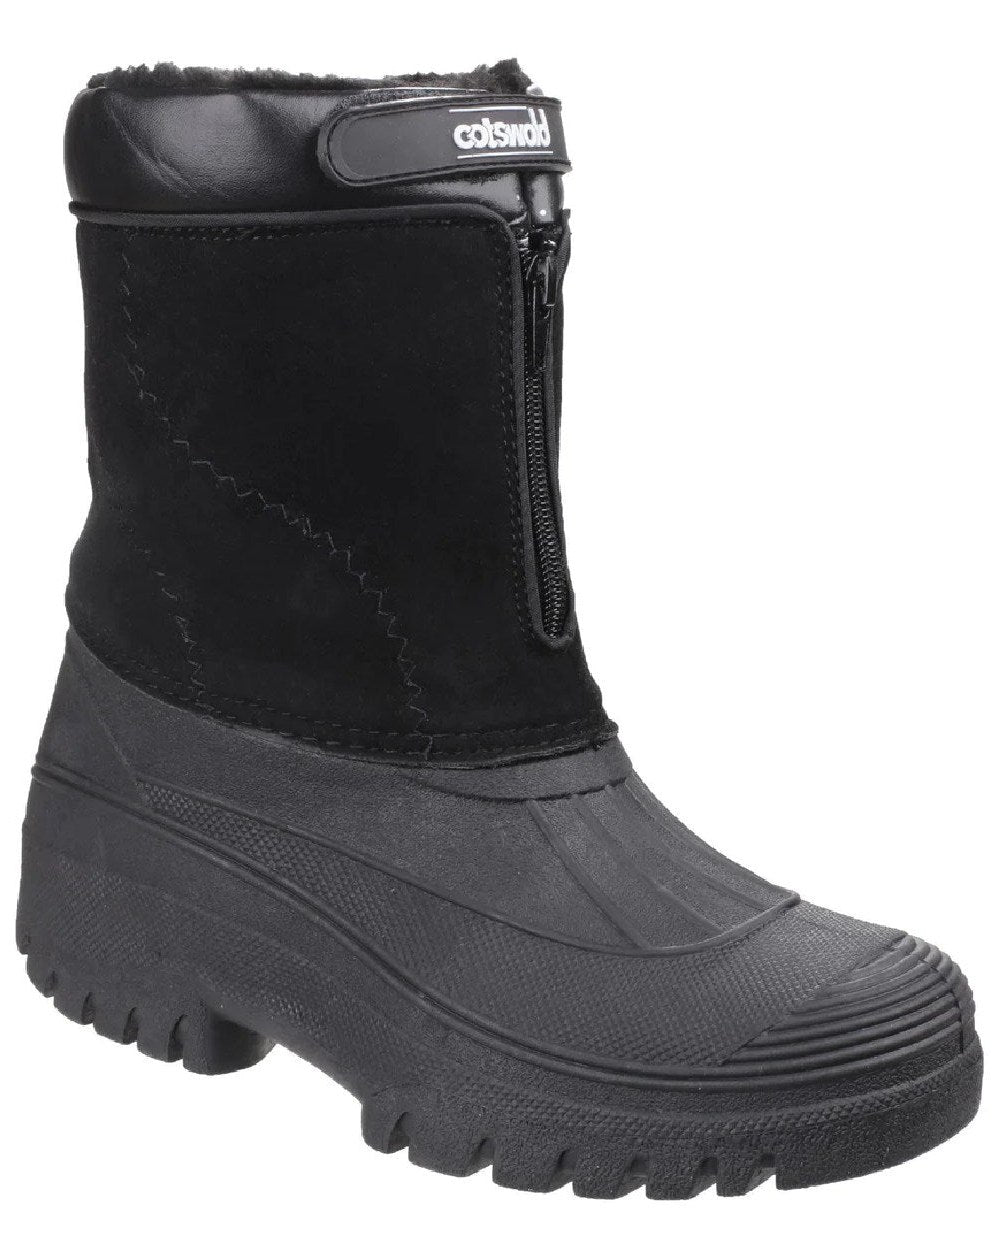 Black coloured Cotswold Womens Venture Waterproof Winter Boots on white background 